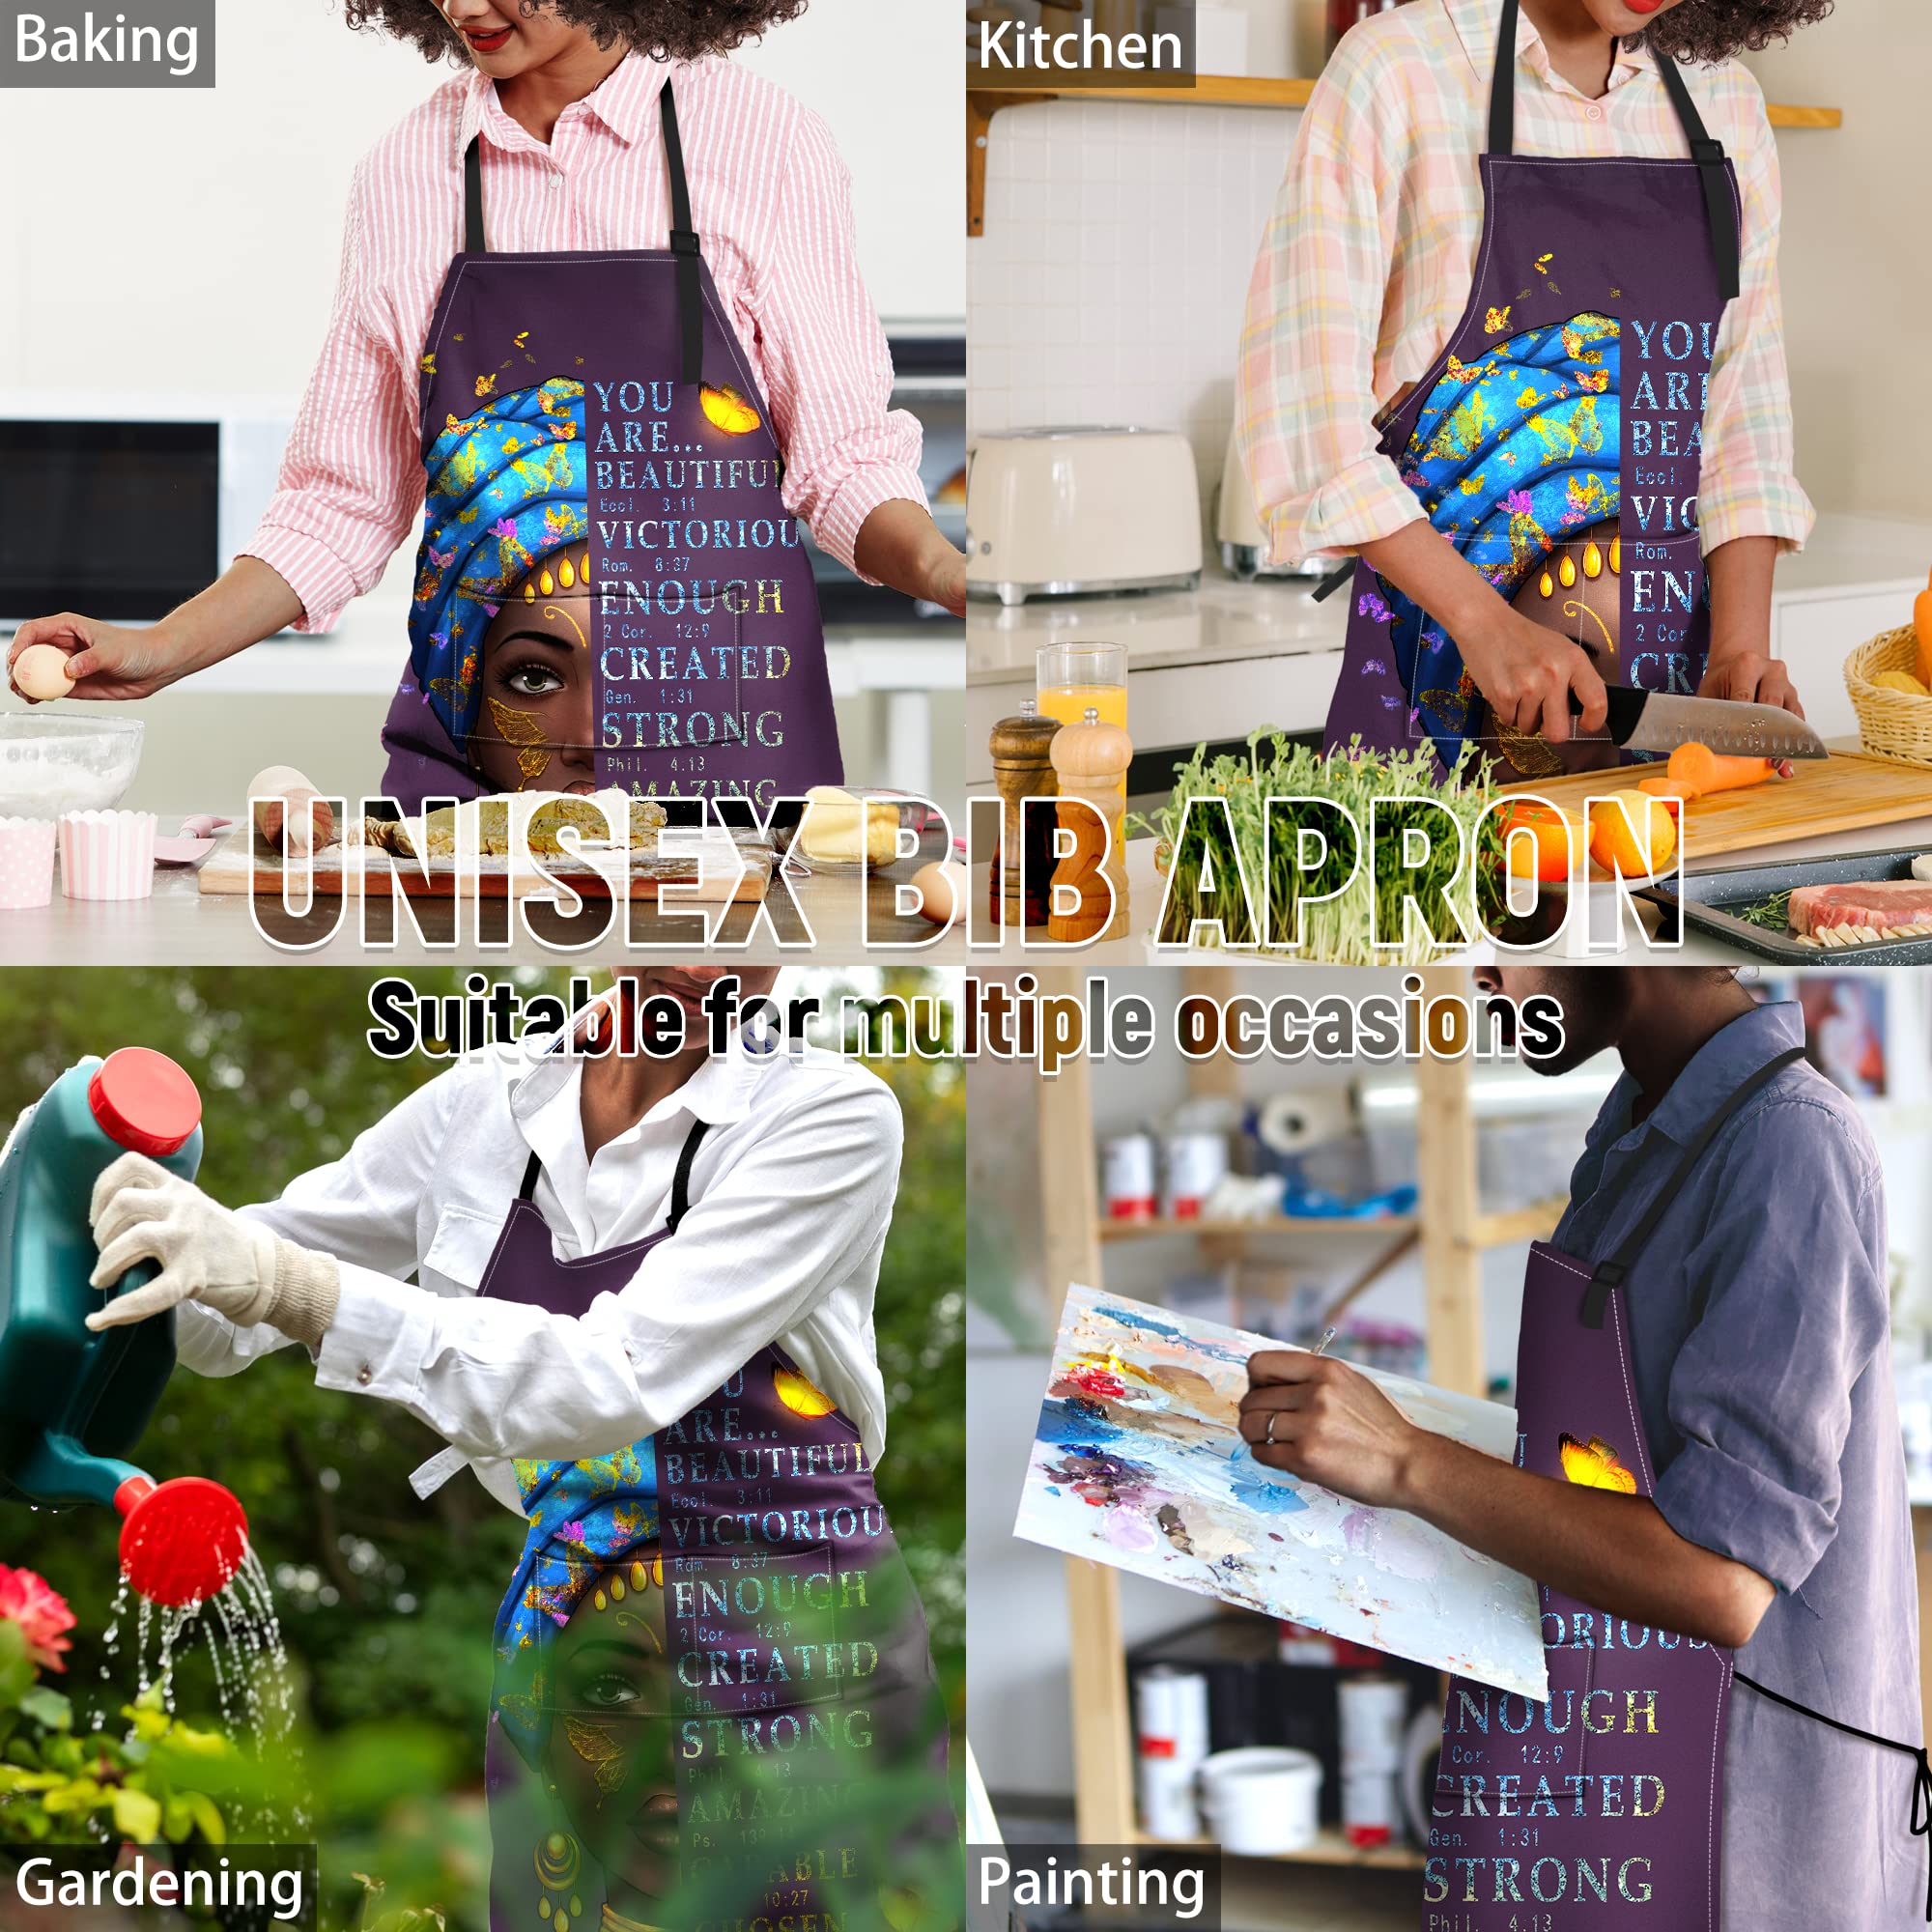 IAGM Aprons for Women with Pockets African Art Apron Afro Black Women Kitchen Aprons Adjustable Neck For Women Chef Bbq Cooking Gardening Home Waterproof Oil Proof 33x28inch